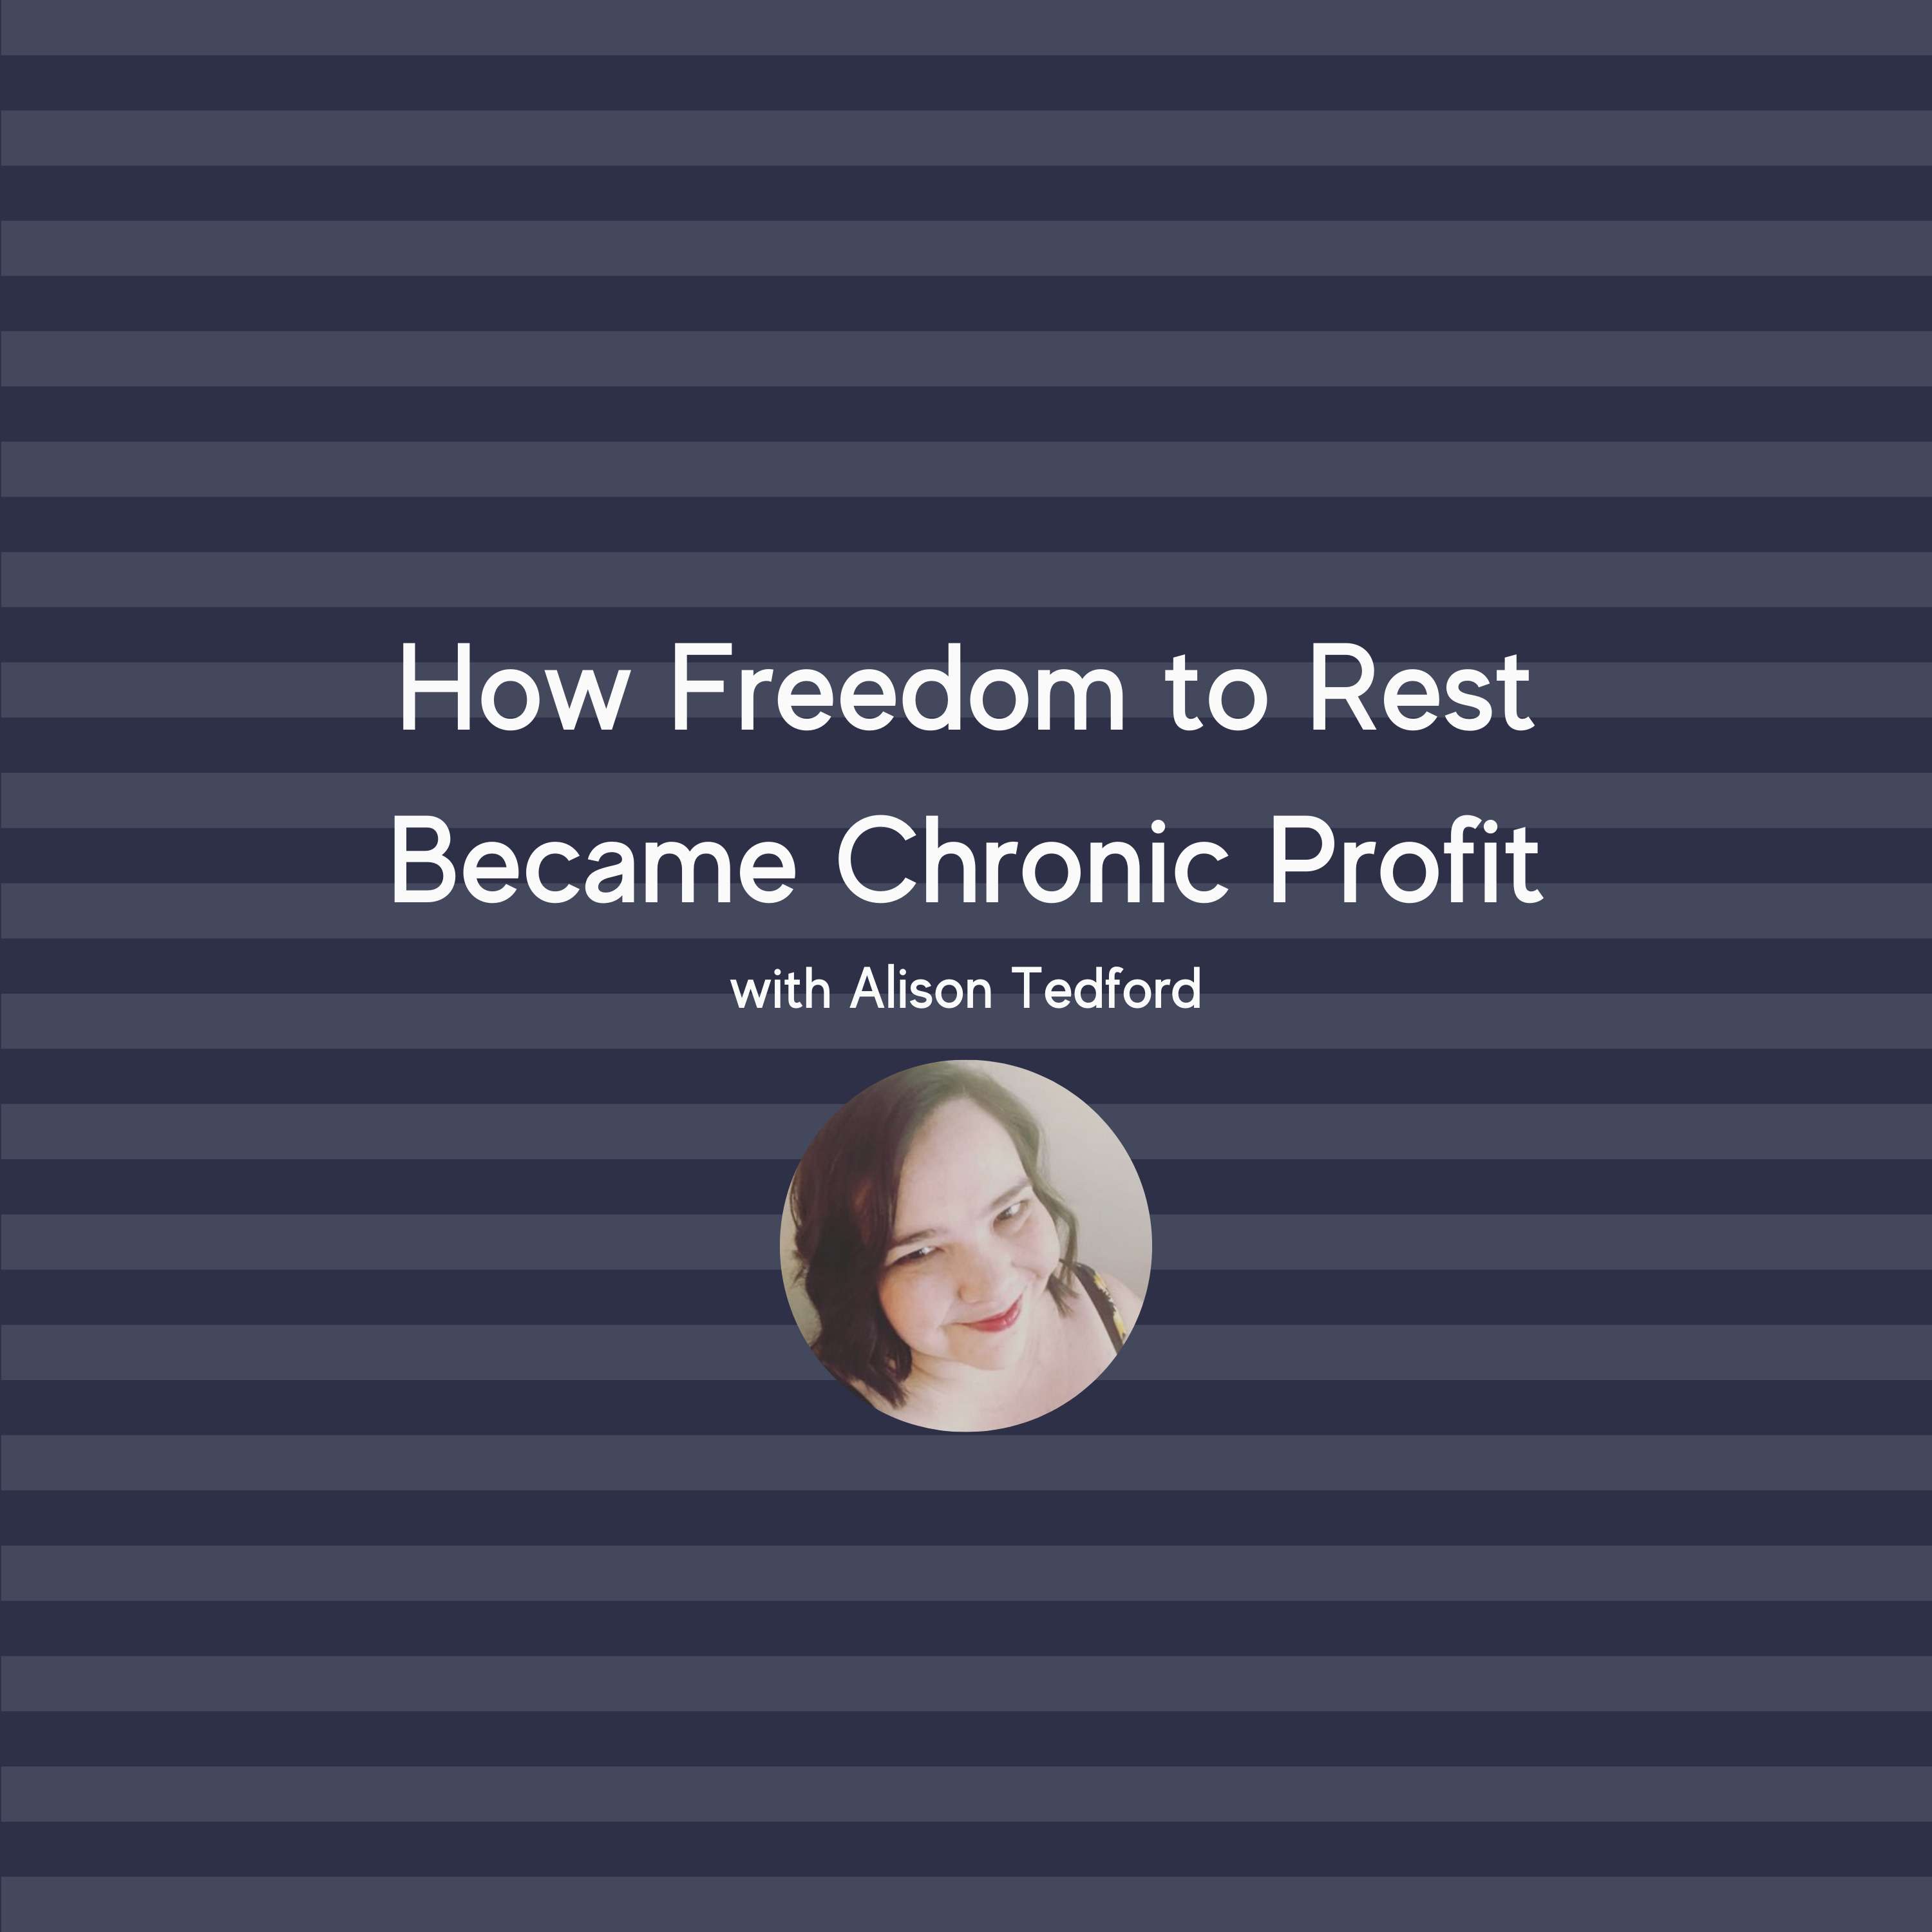 How Freedom to Rest Became Chronic Profit with Alison Tedford